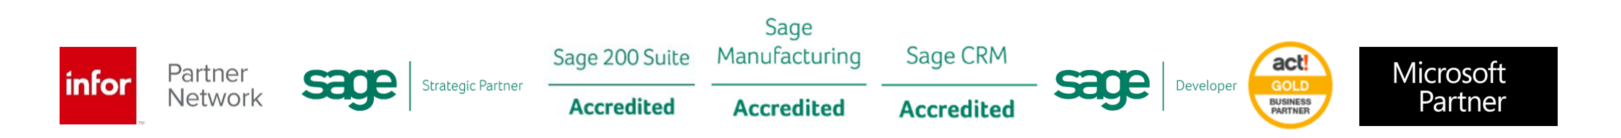 Sage CRM Sales Force Automation (SFA) Software